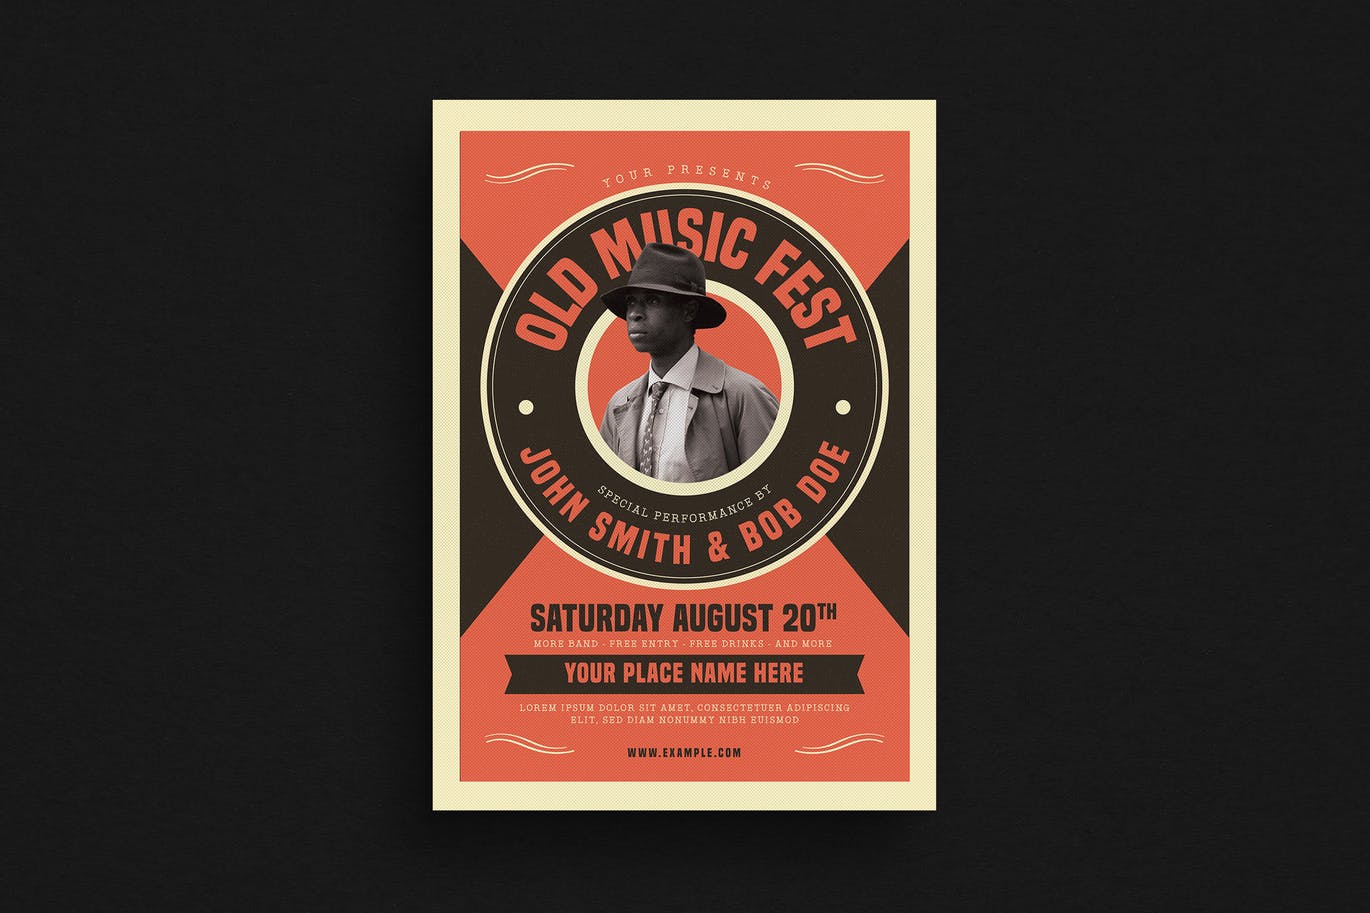 An old music flyer template